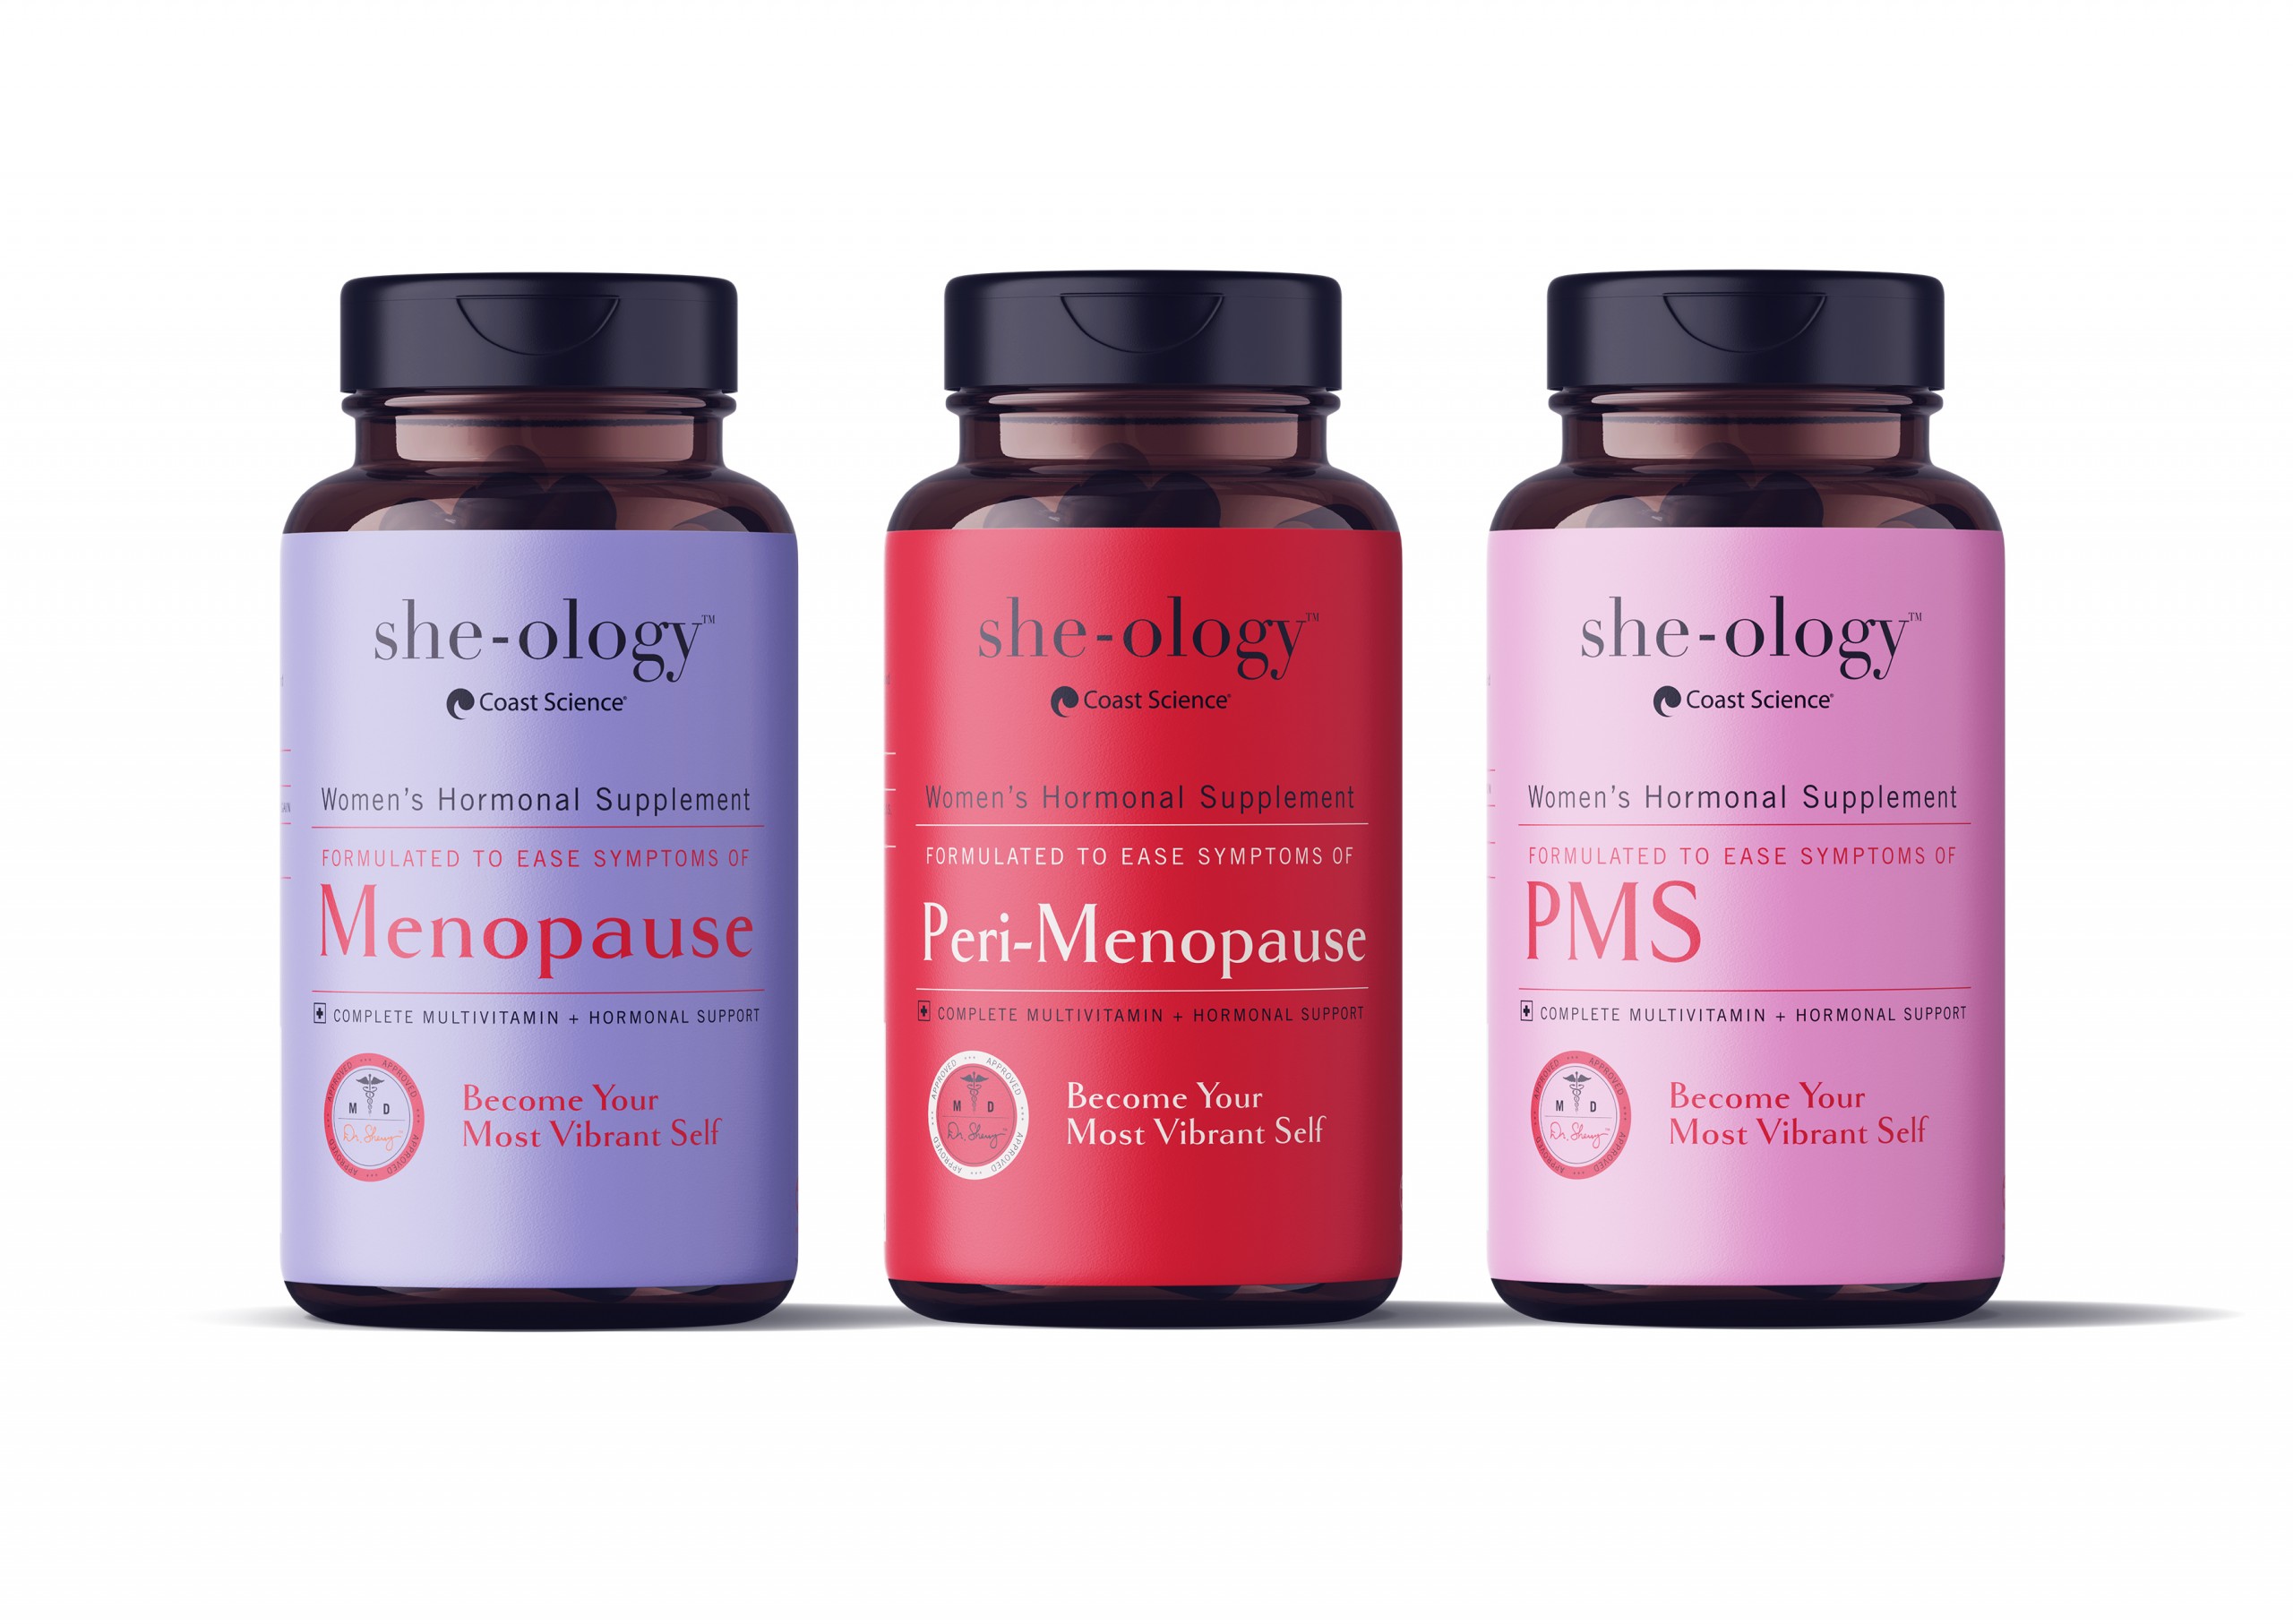 She-ology natural supplements for menopause, perimenopause, midlife, pms and lack of desire